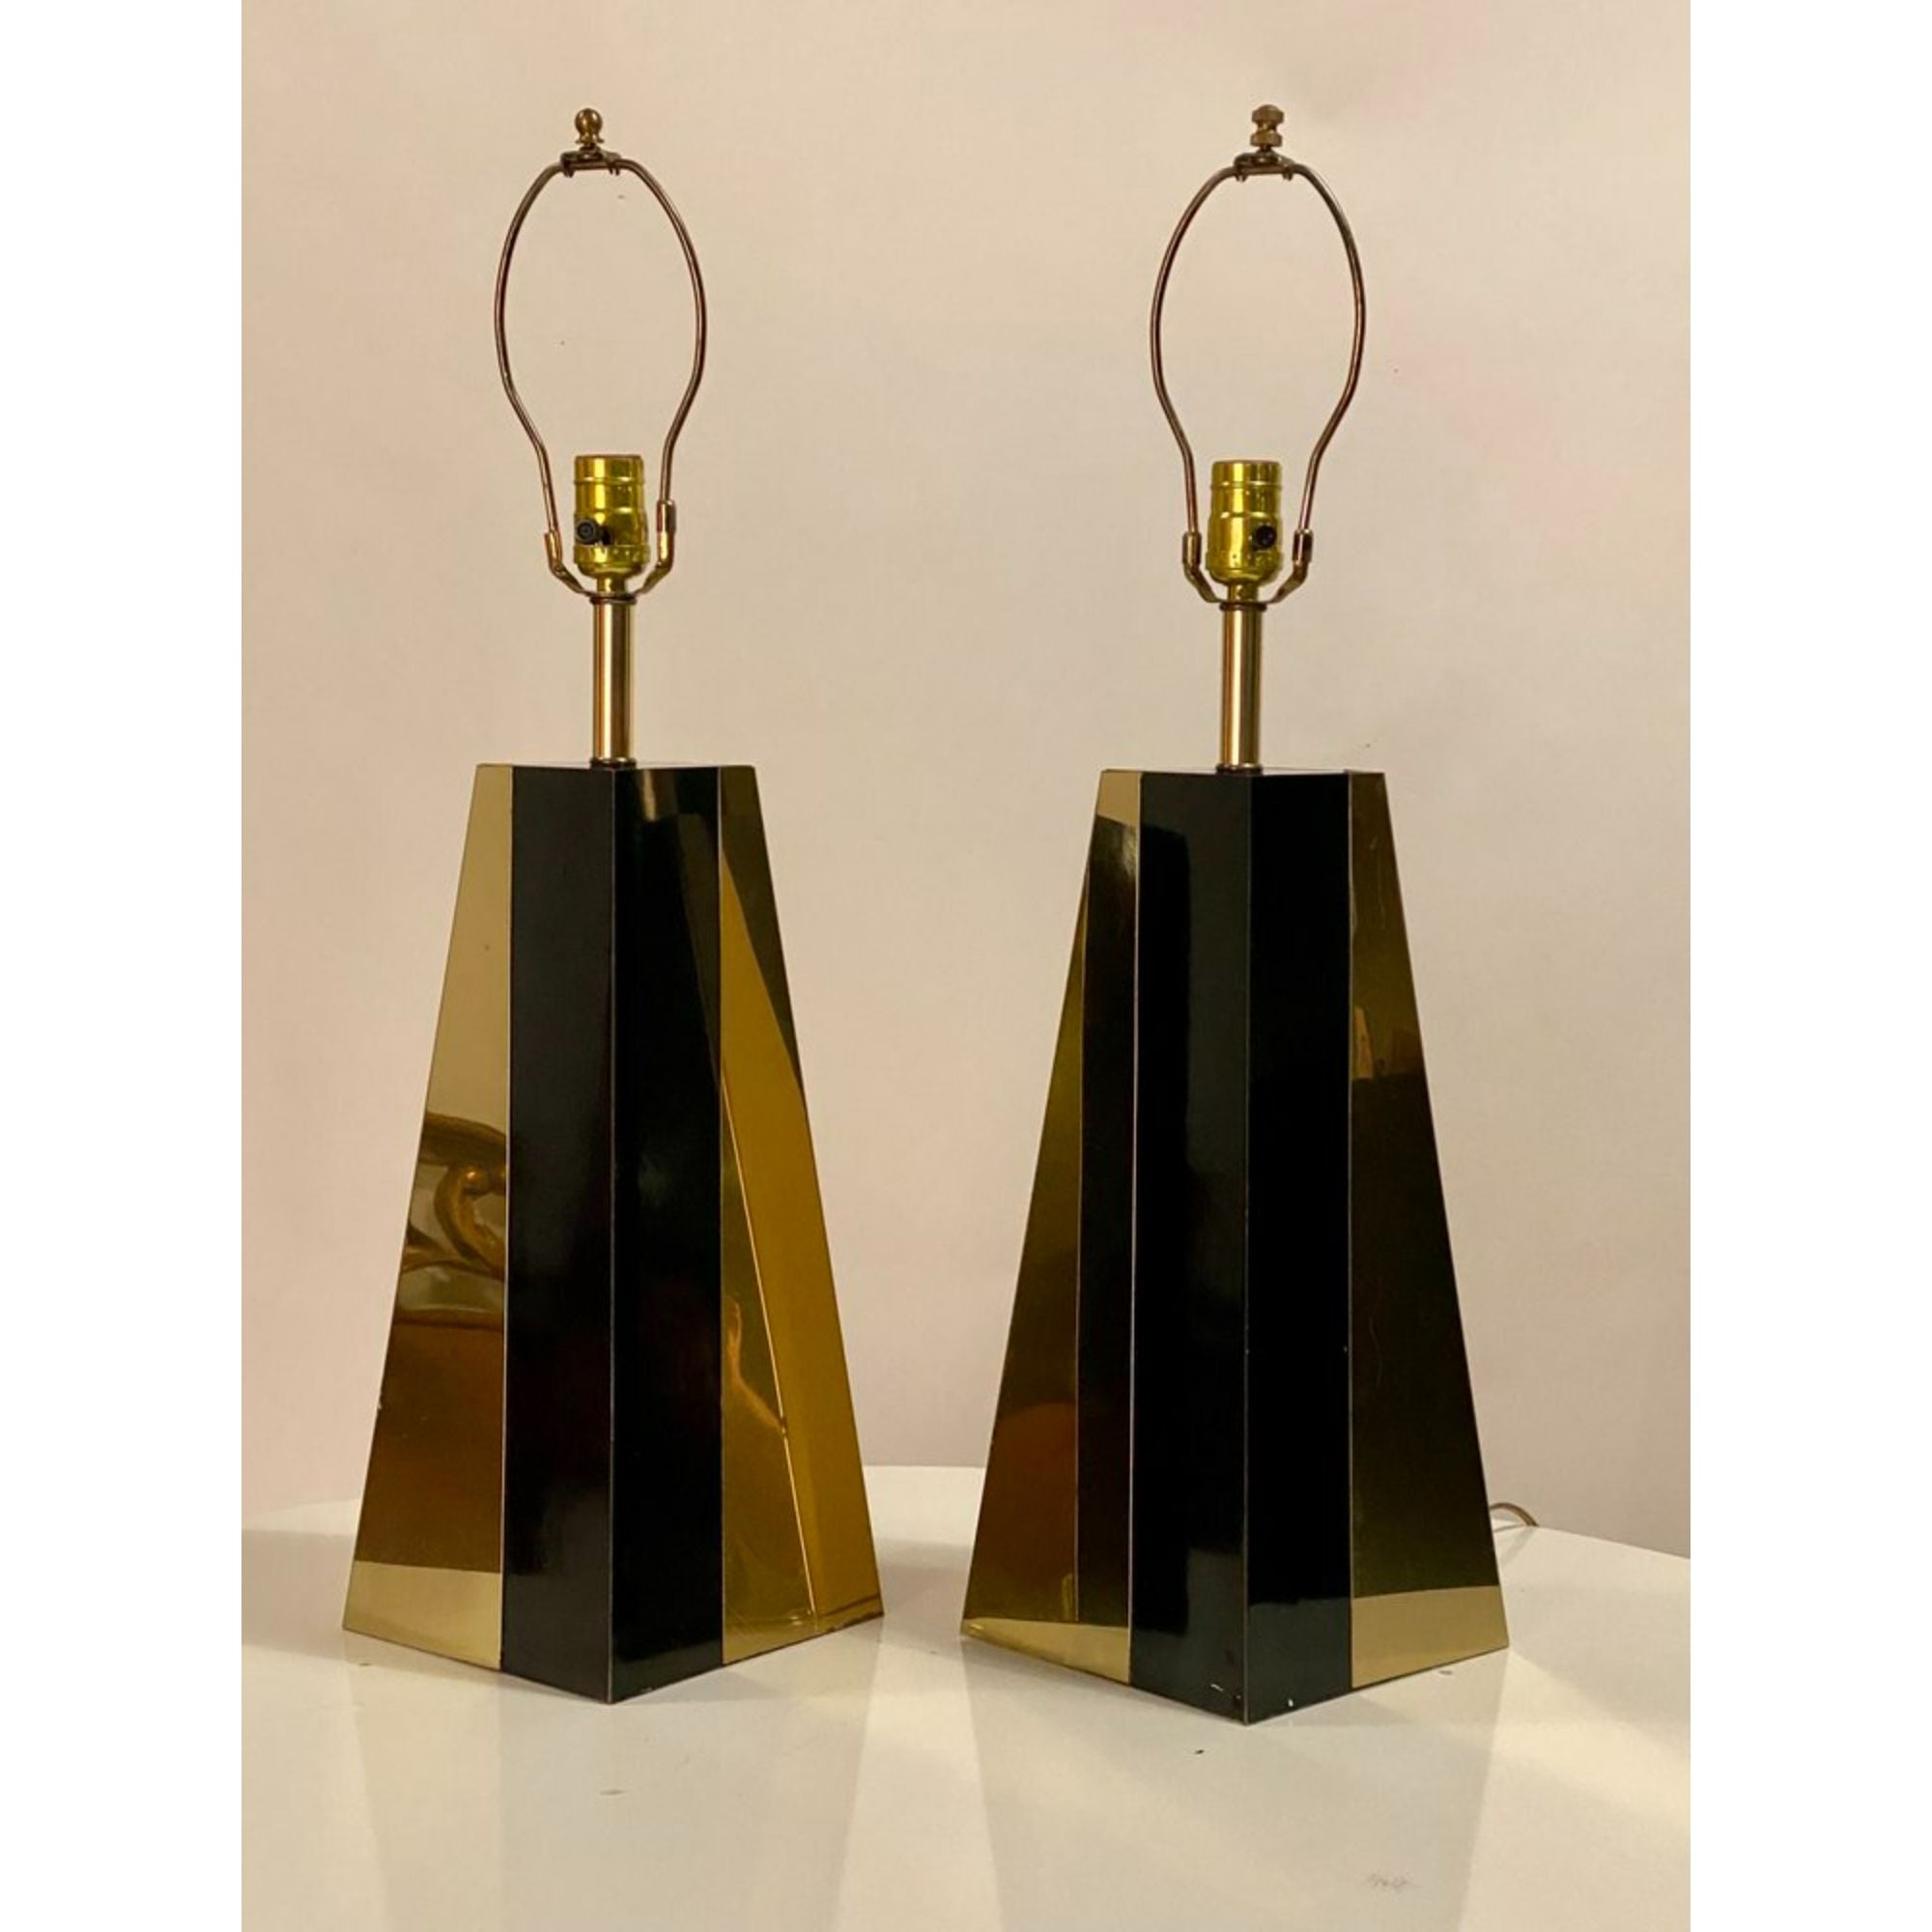 Pair of 1970's glamour pyramid shape table lamps in black and brass in the style of Pierre Cardin. Wired and with harps.

Additional Information:
Materials: Brass
Color: Black, Gold
Style: Hollywood Regency
Lamp Shade: Not Included
Style